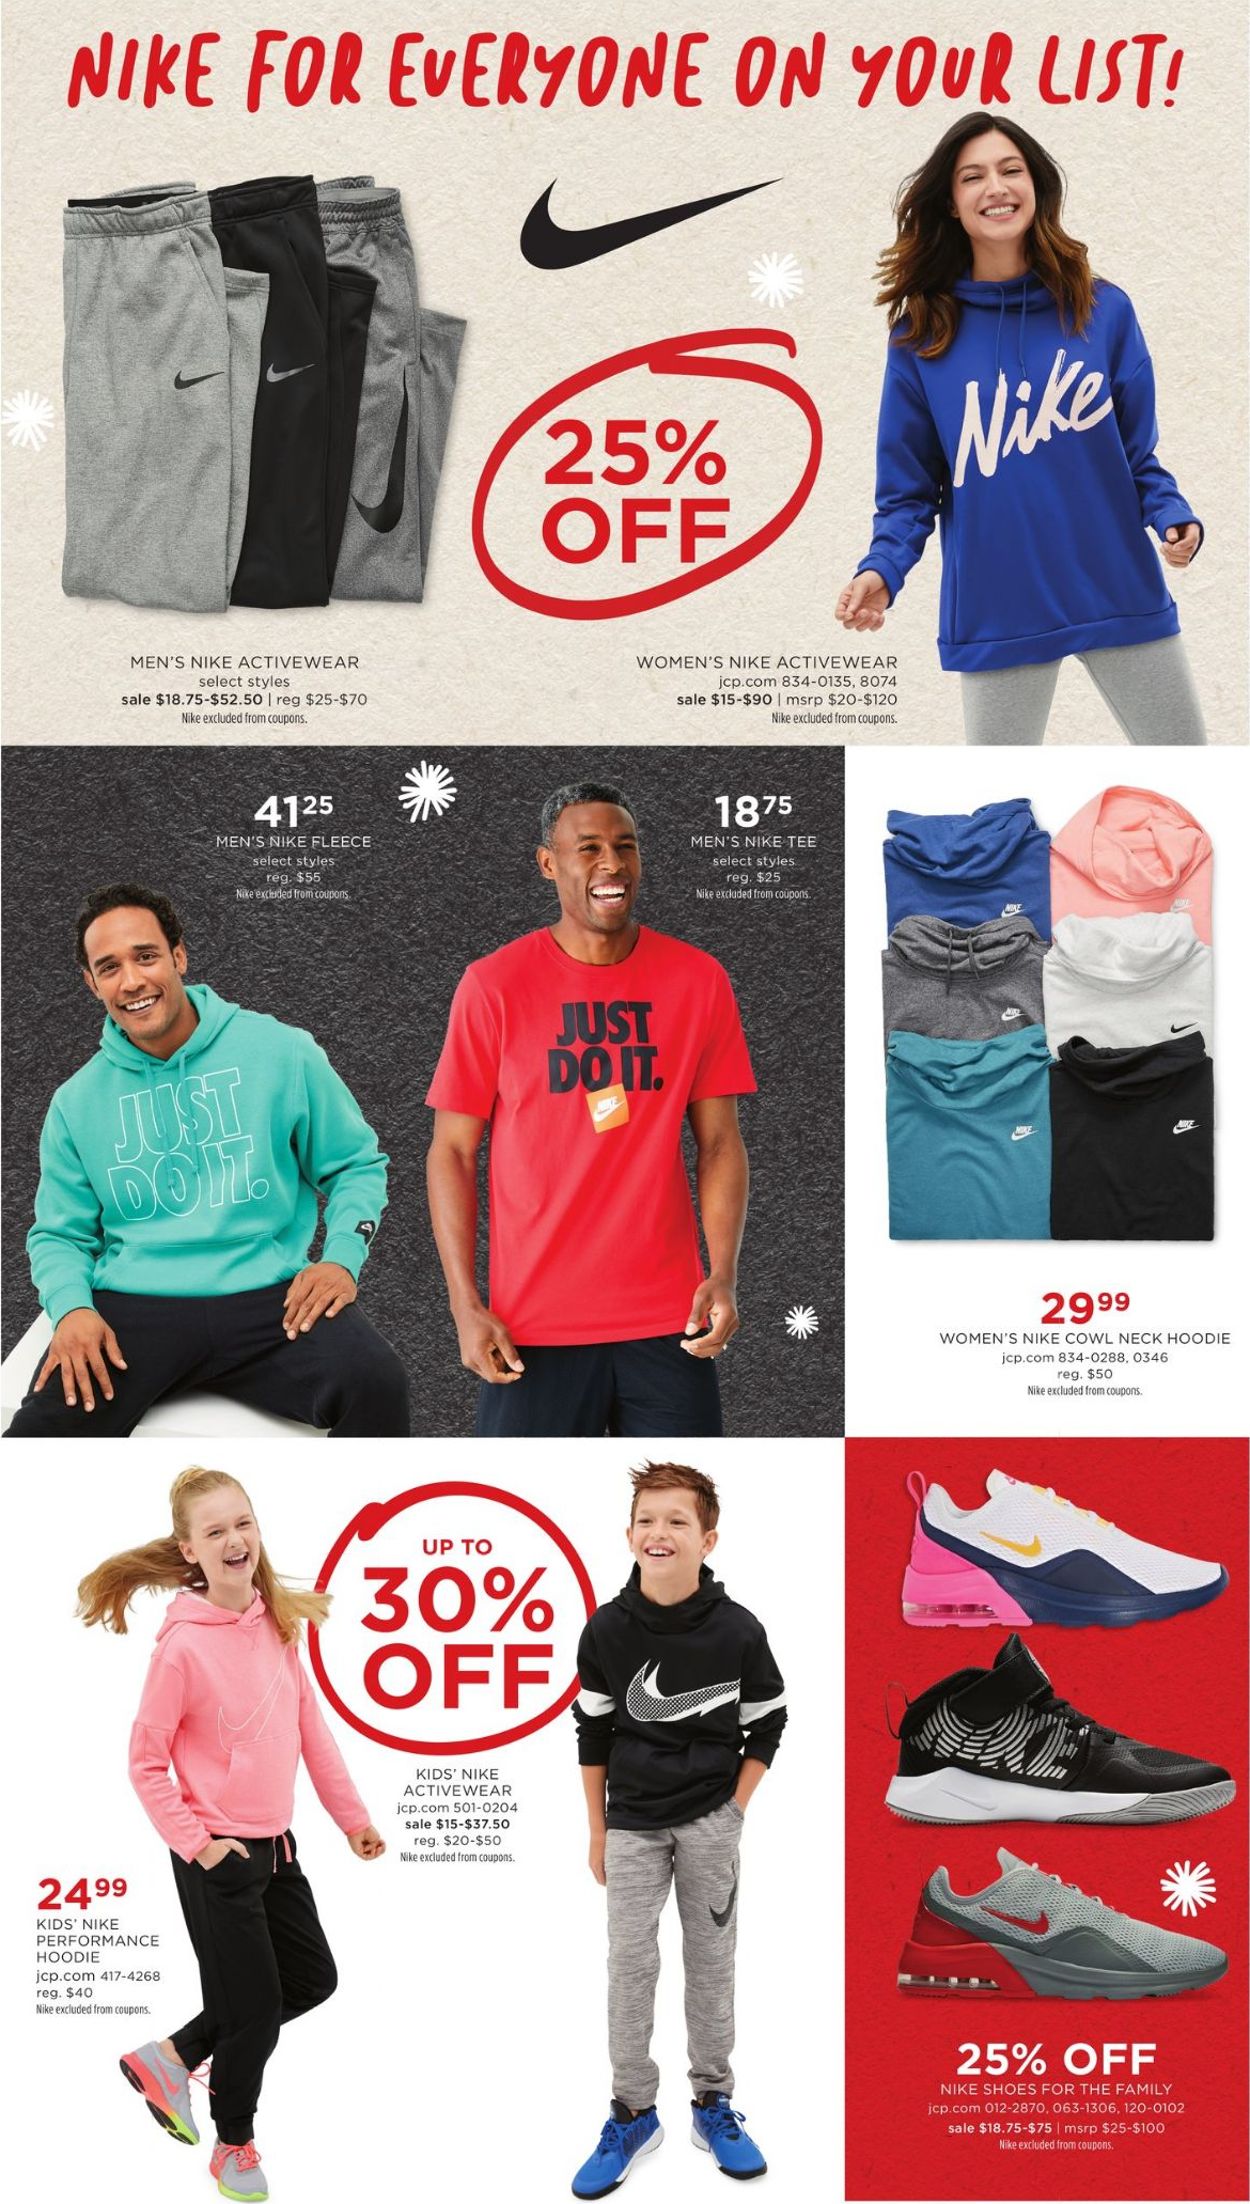 jcpenney nike outfit